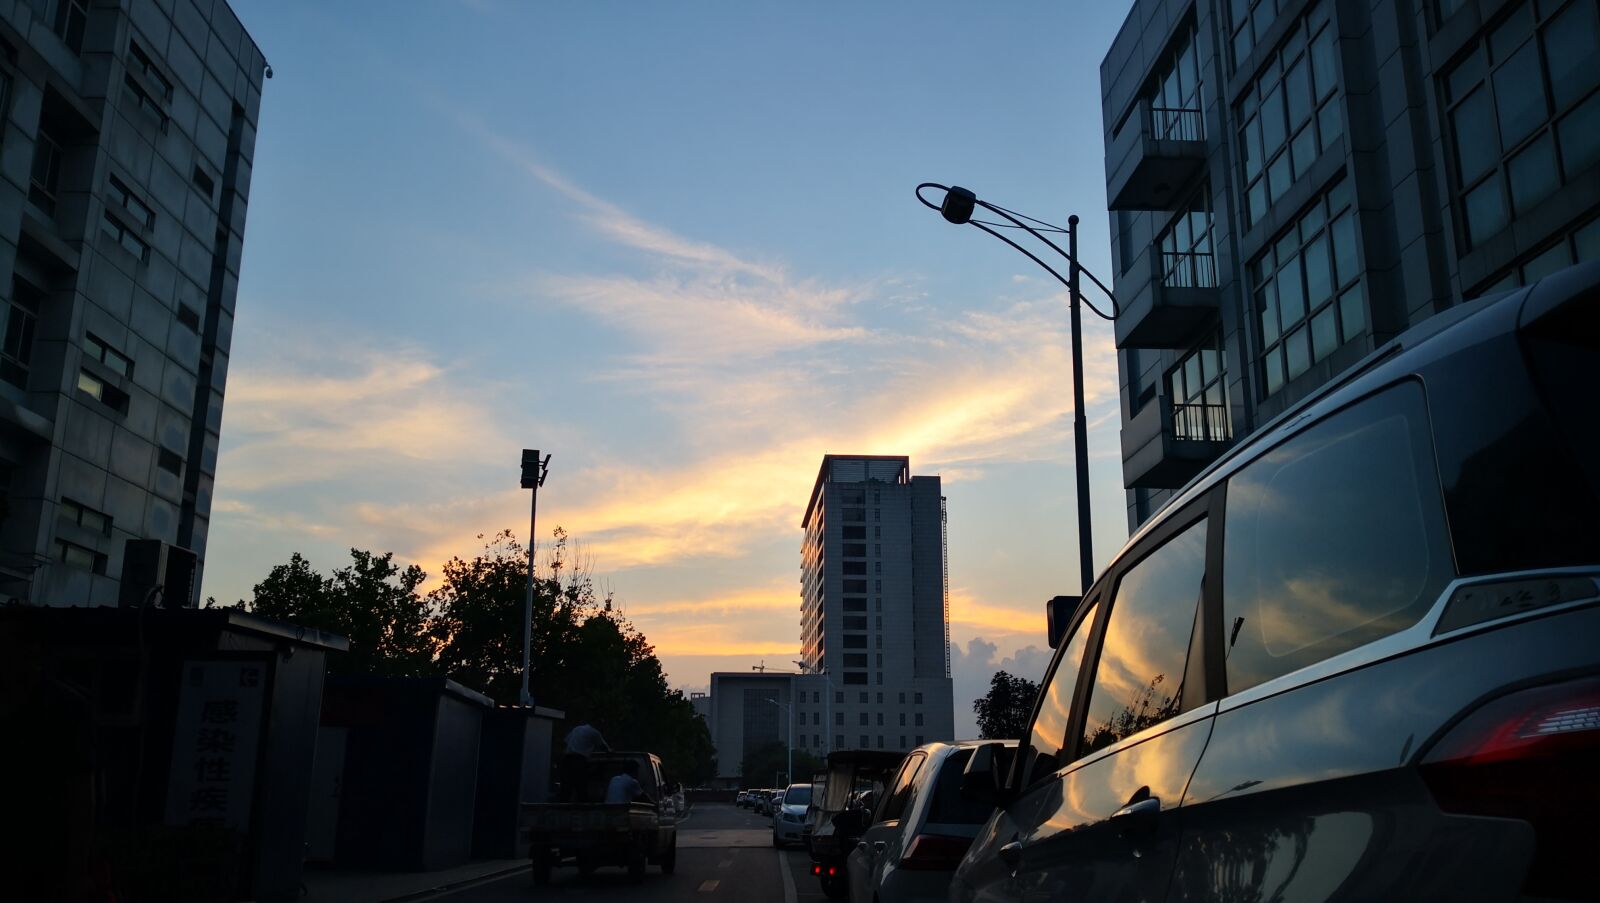 HUAWEI Mate 10 sample photo. Sunset, architecture, sky photography